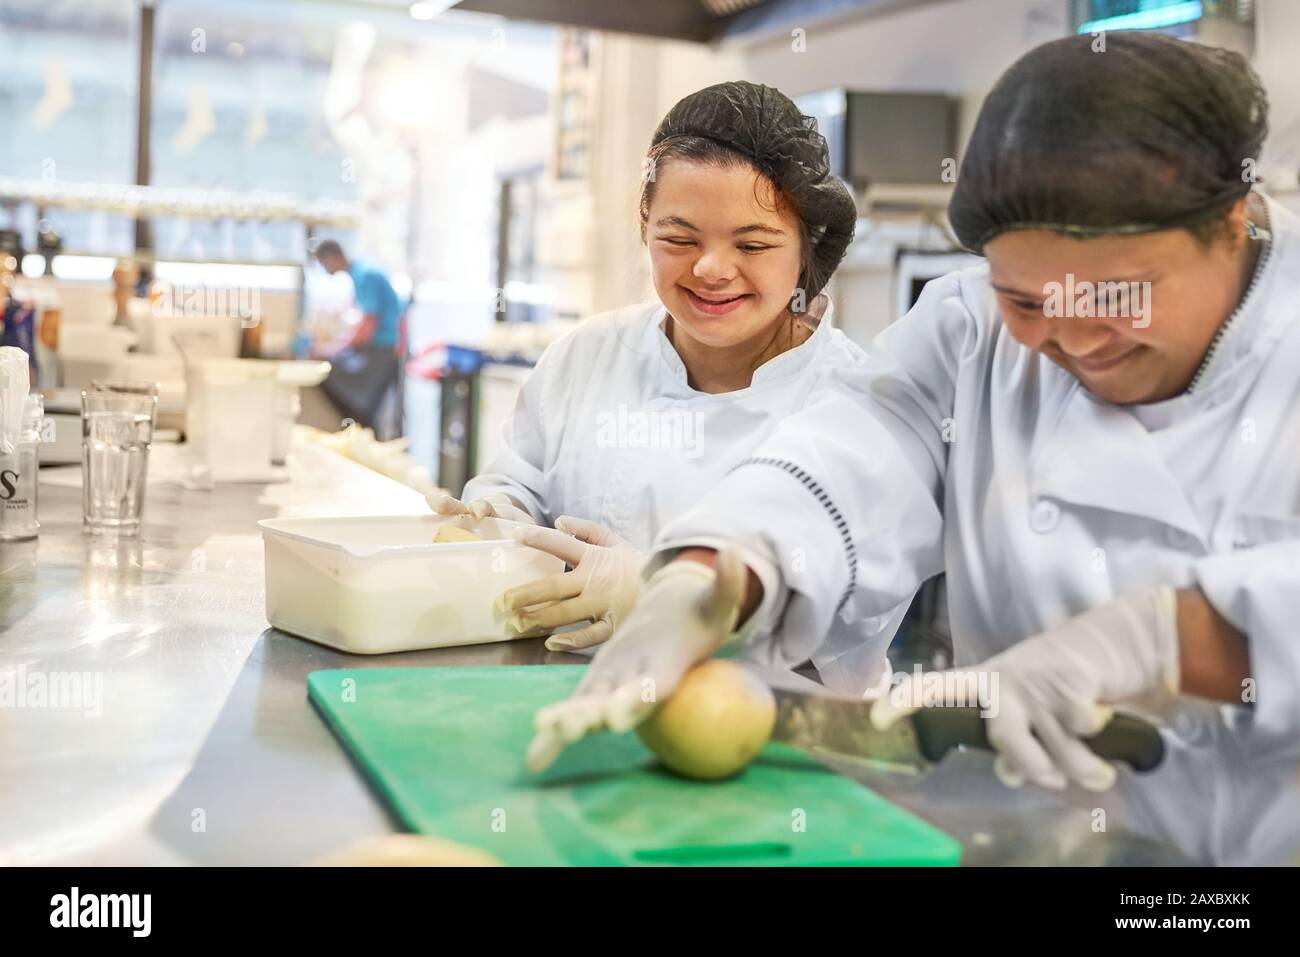 Happy young women with Down Syndrome cooking in restaurant Stock Photo